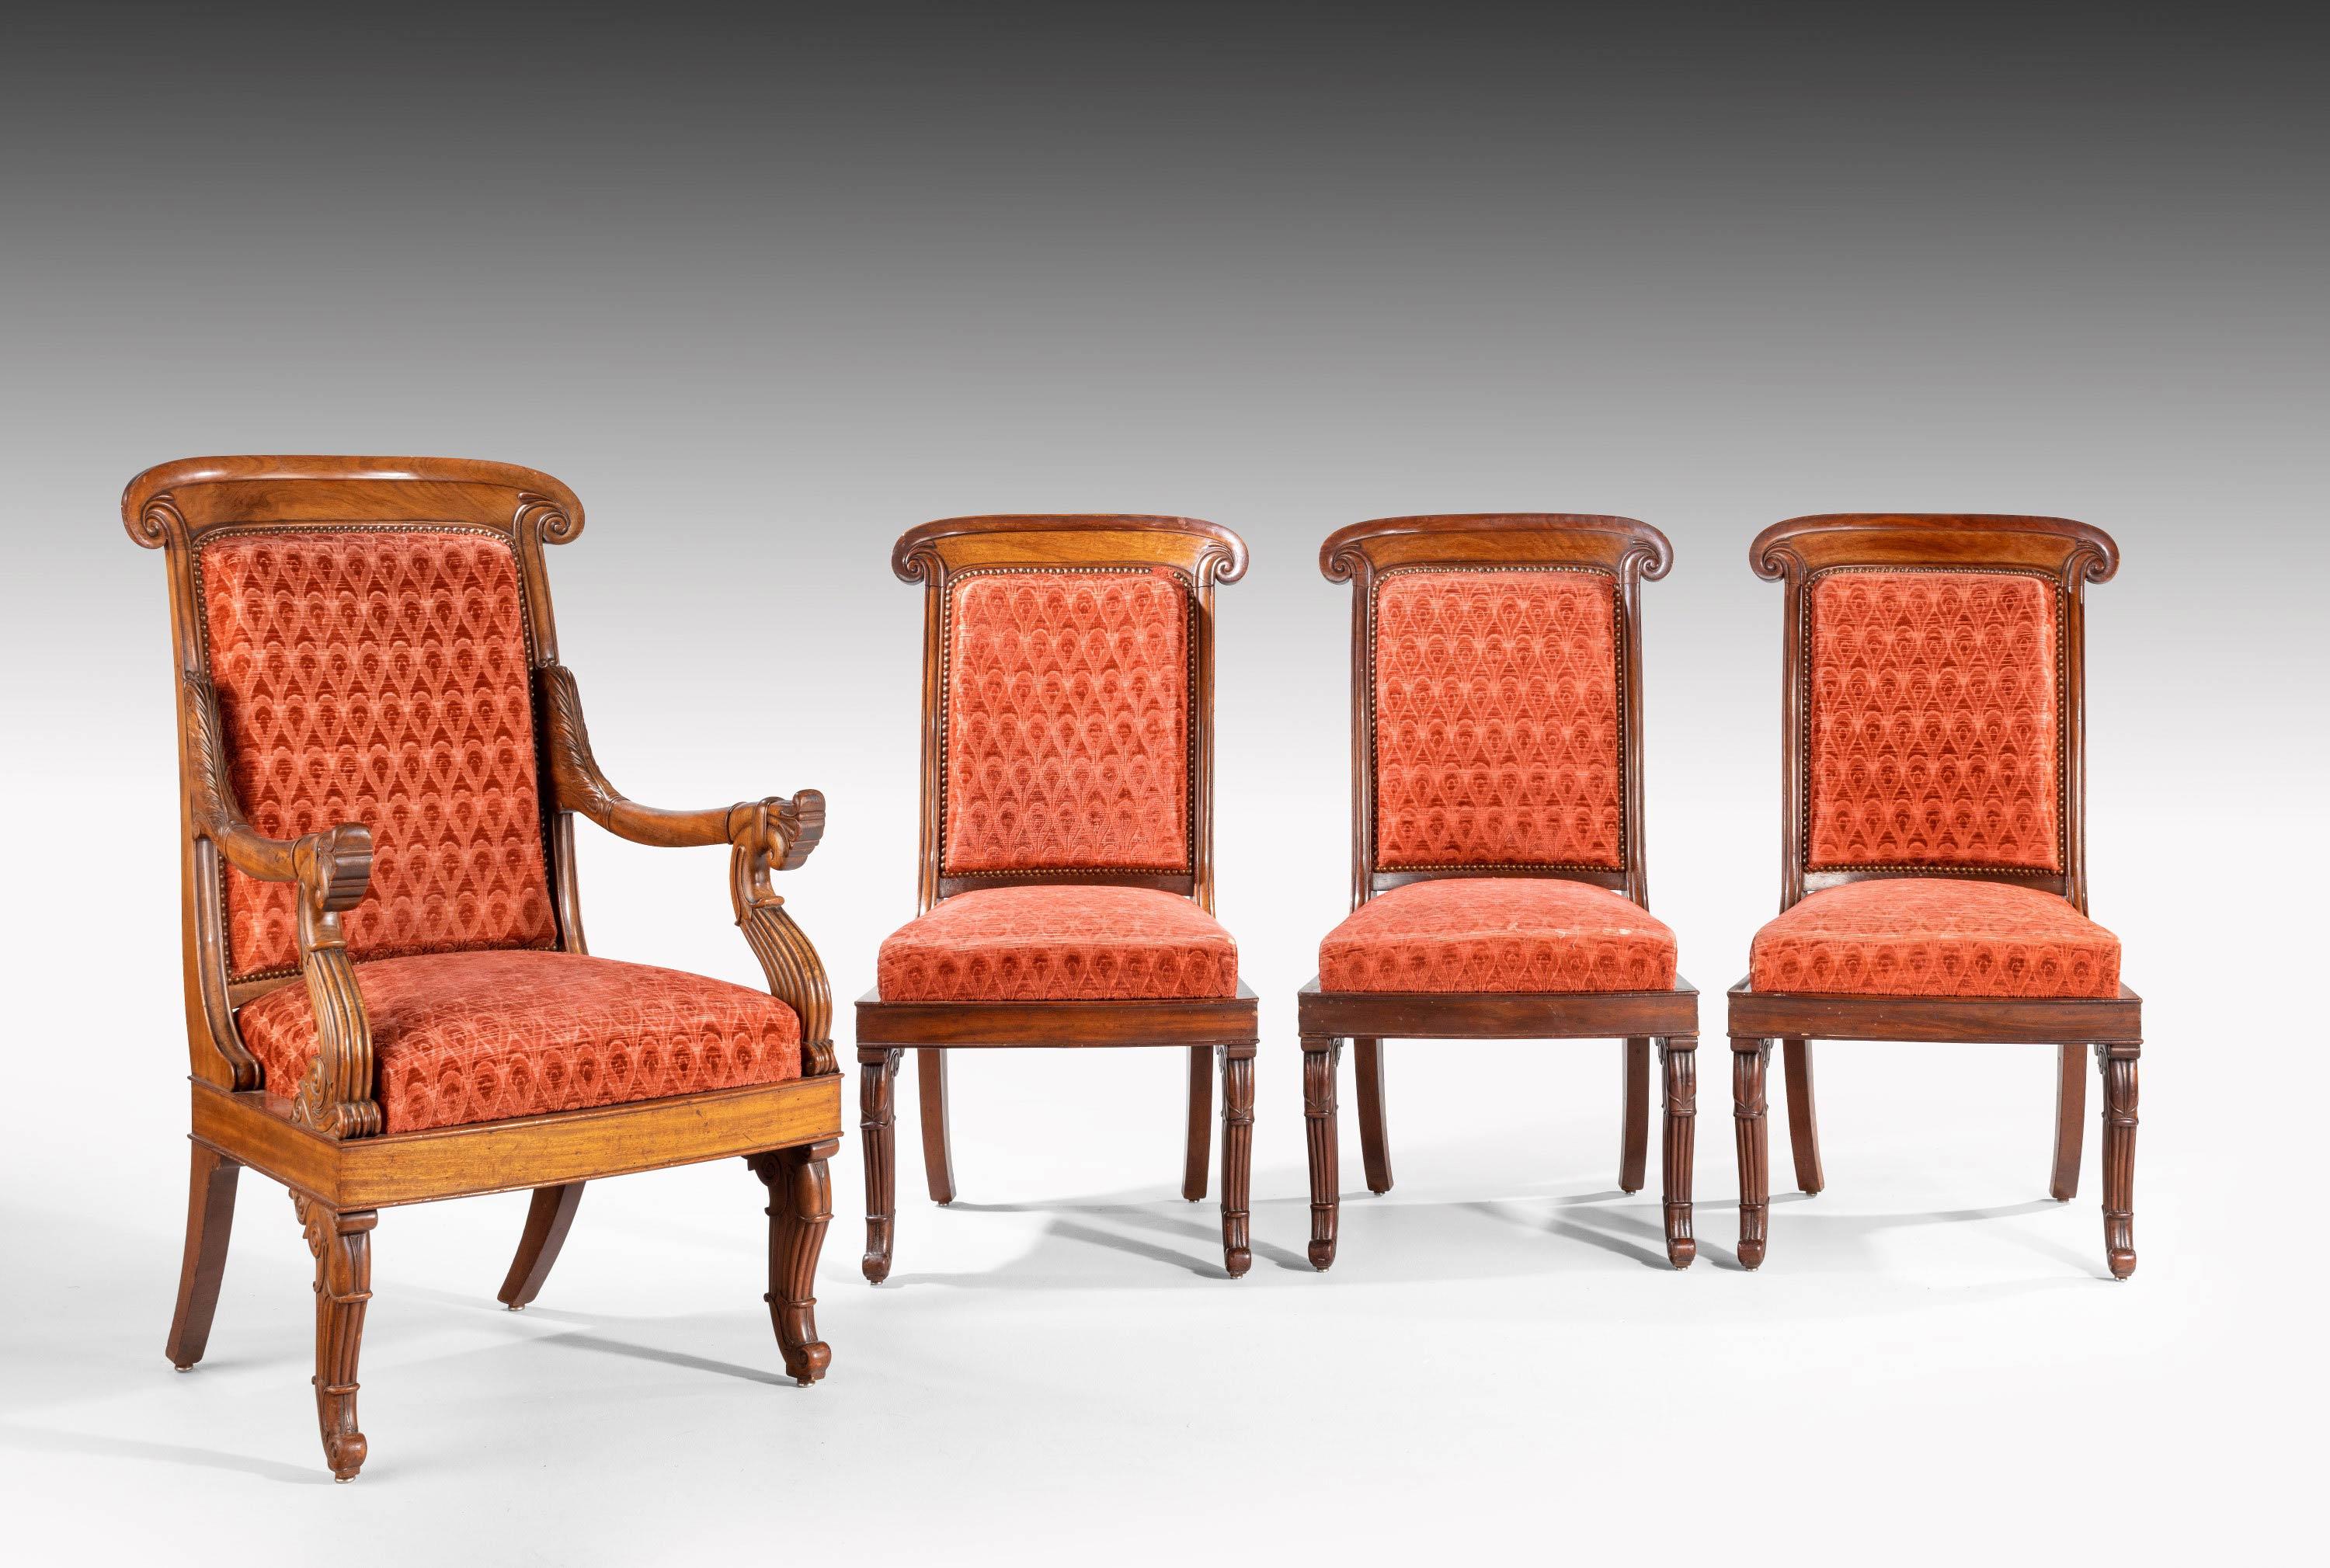 Mid-19th Century Fine Set of Eight William IV Period Chairs